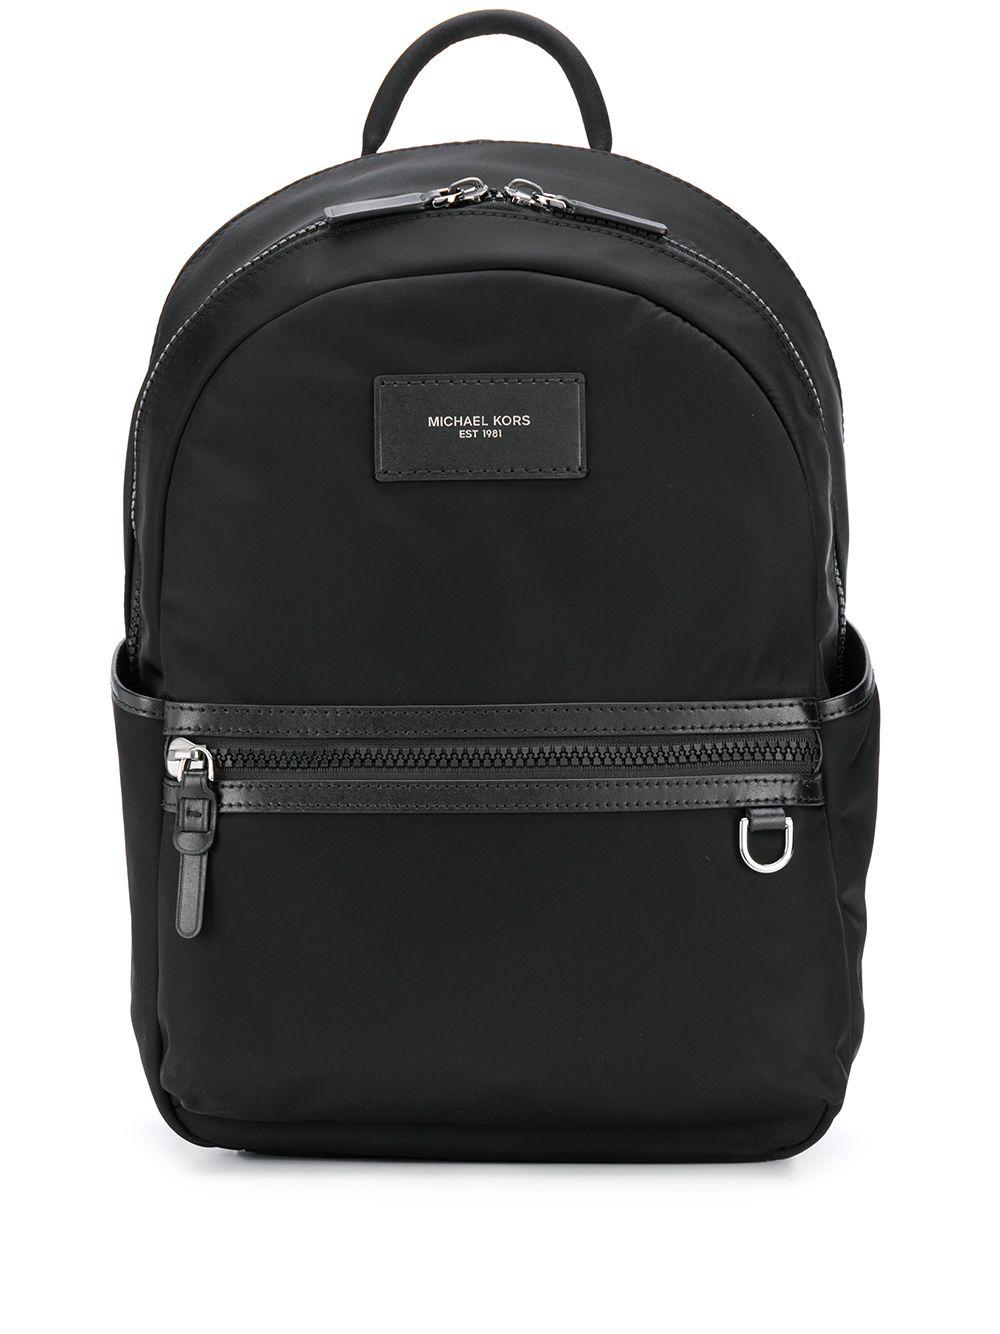 Michael Kors Brooklyn Leather Backpack In Black For Men Lyst